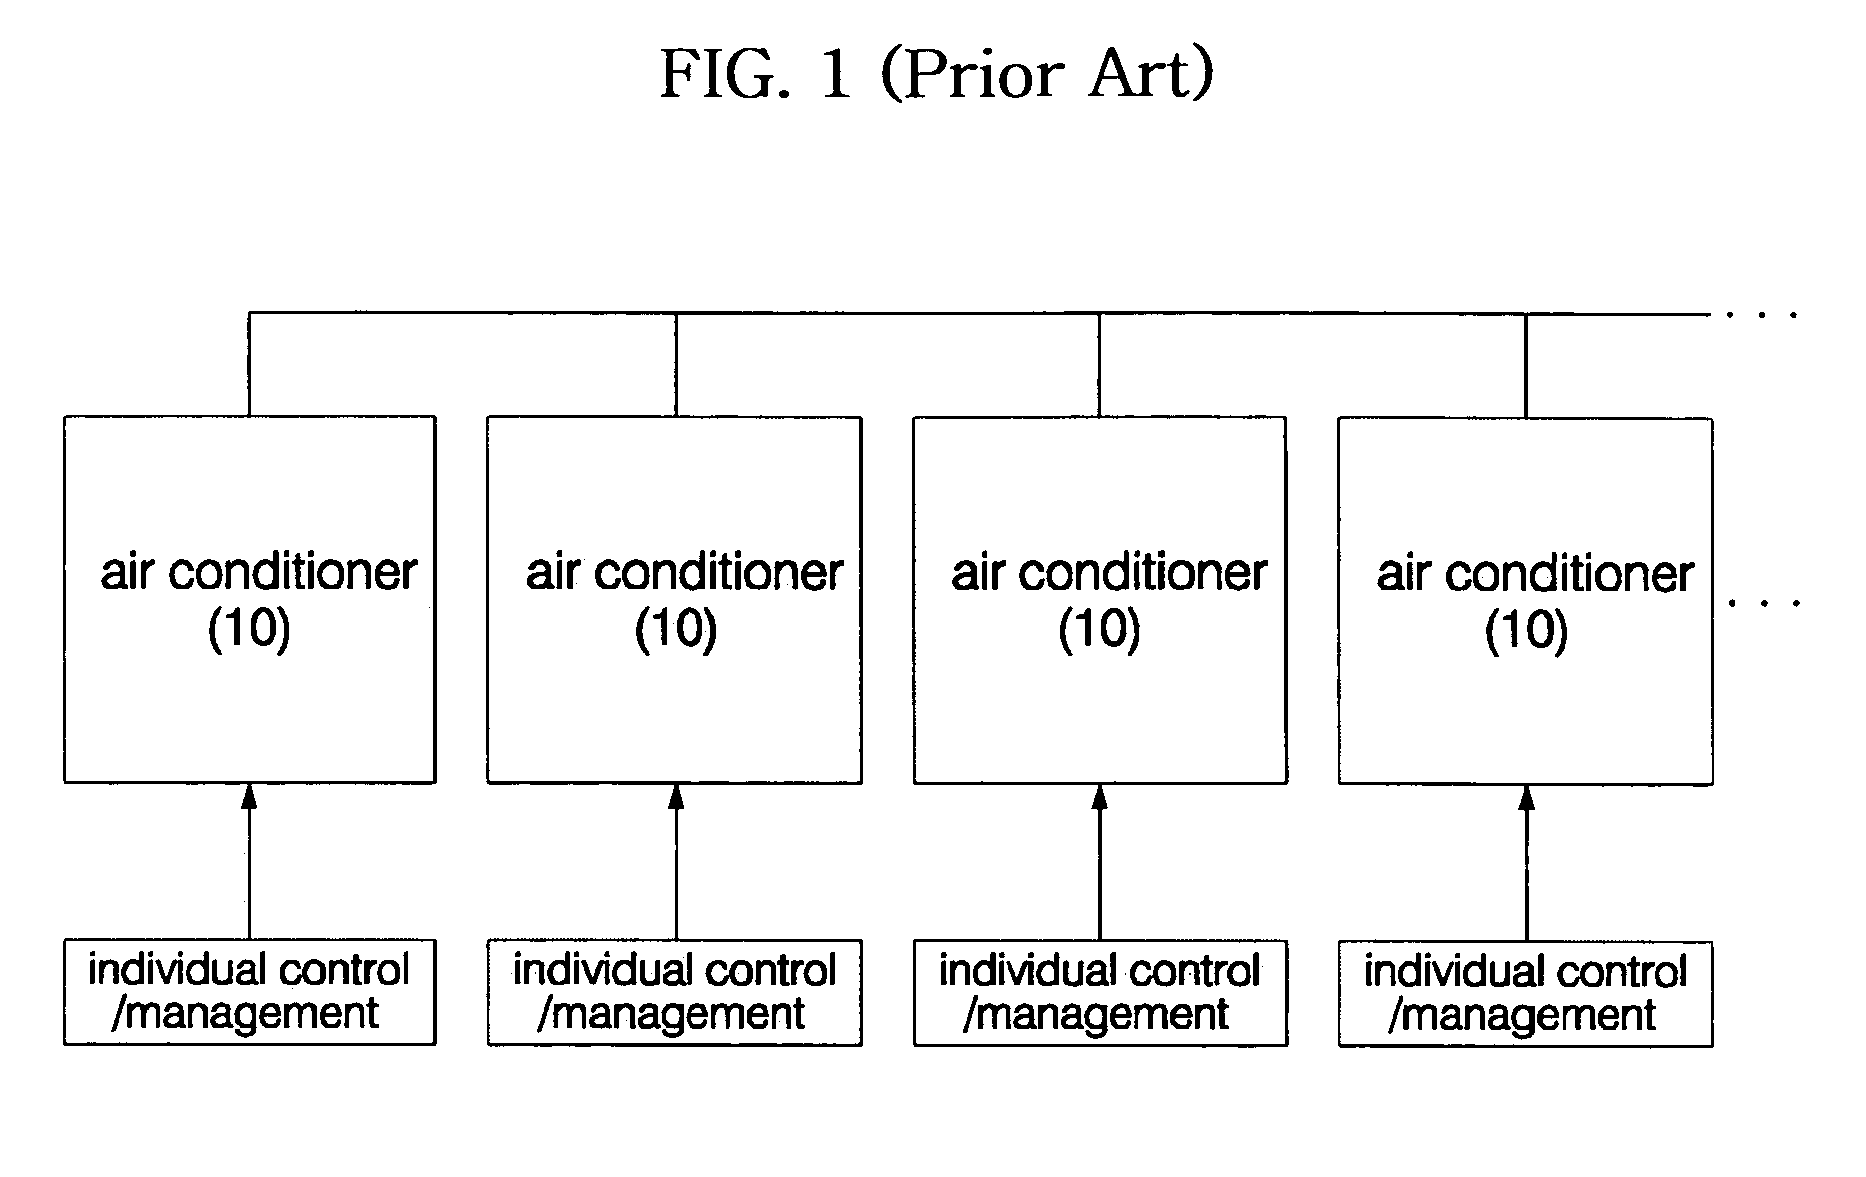 Central control system of air conditioners and method for operating the same